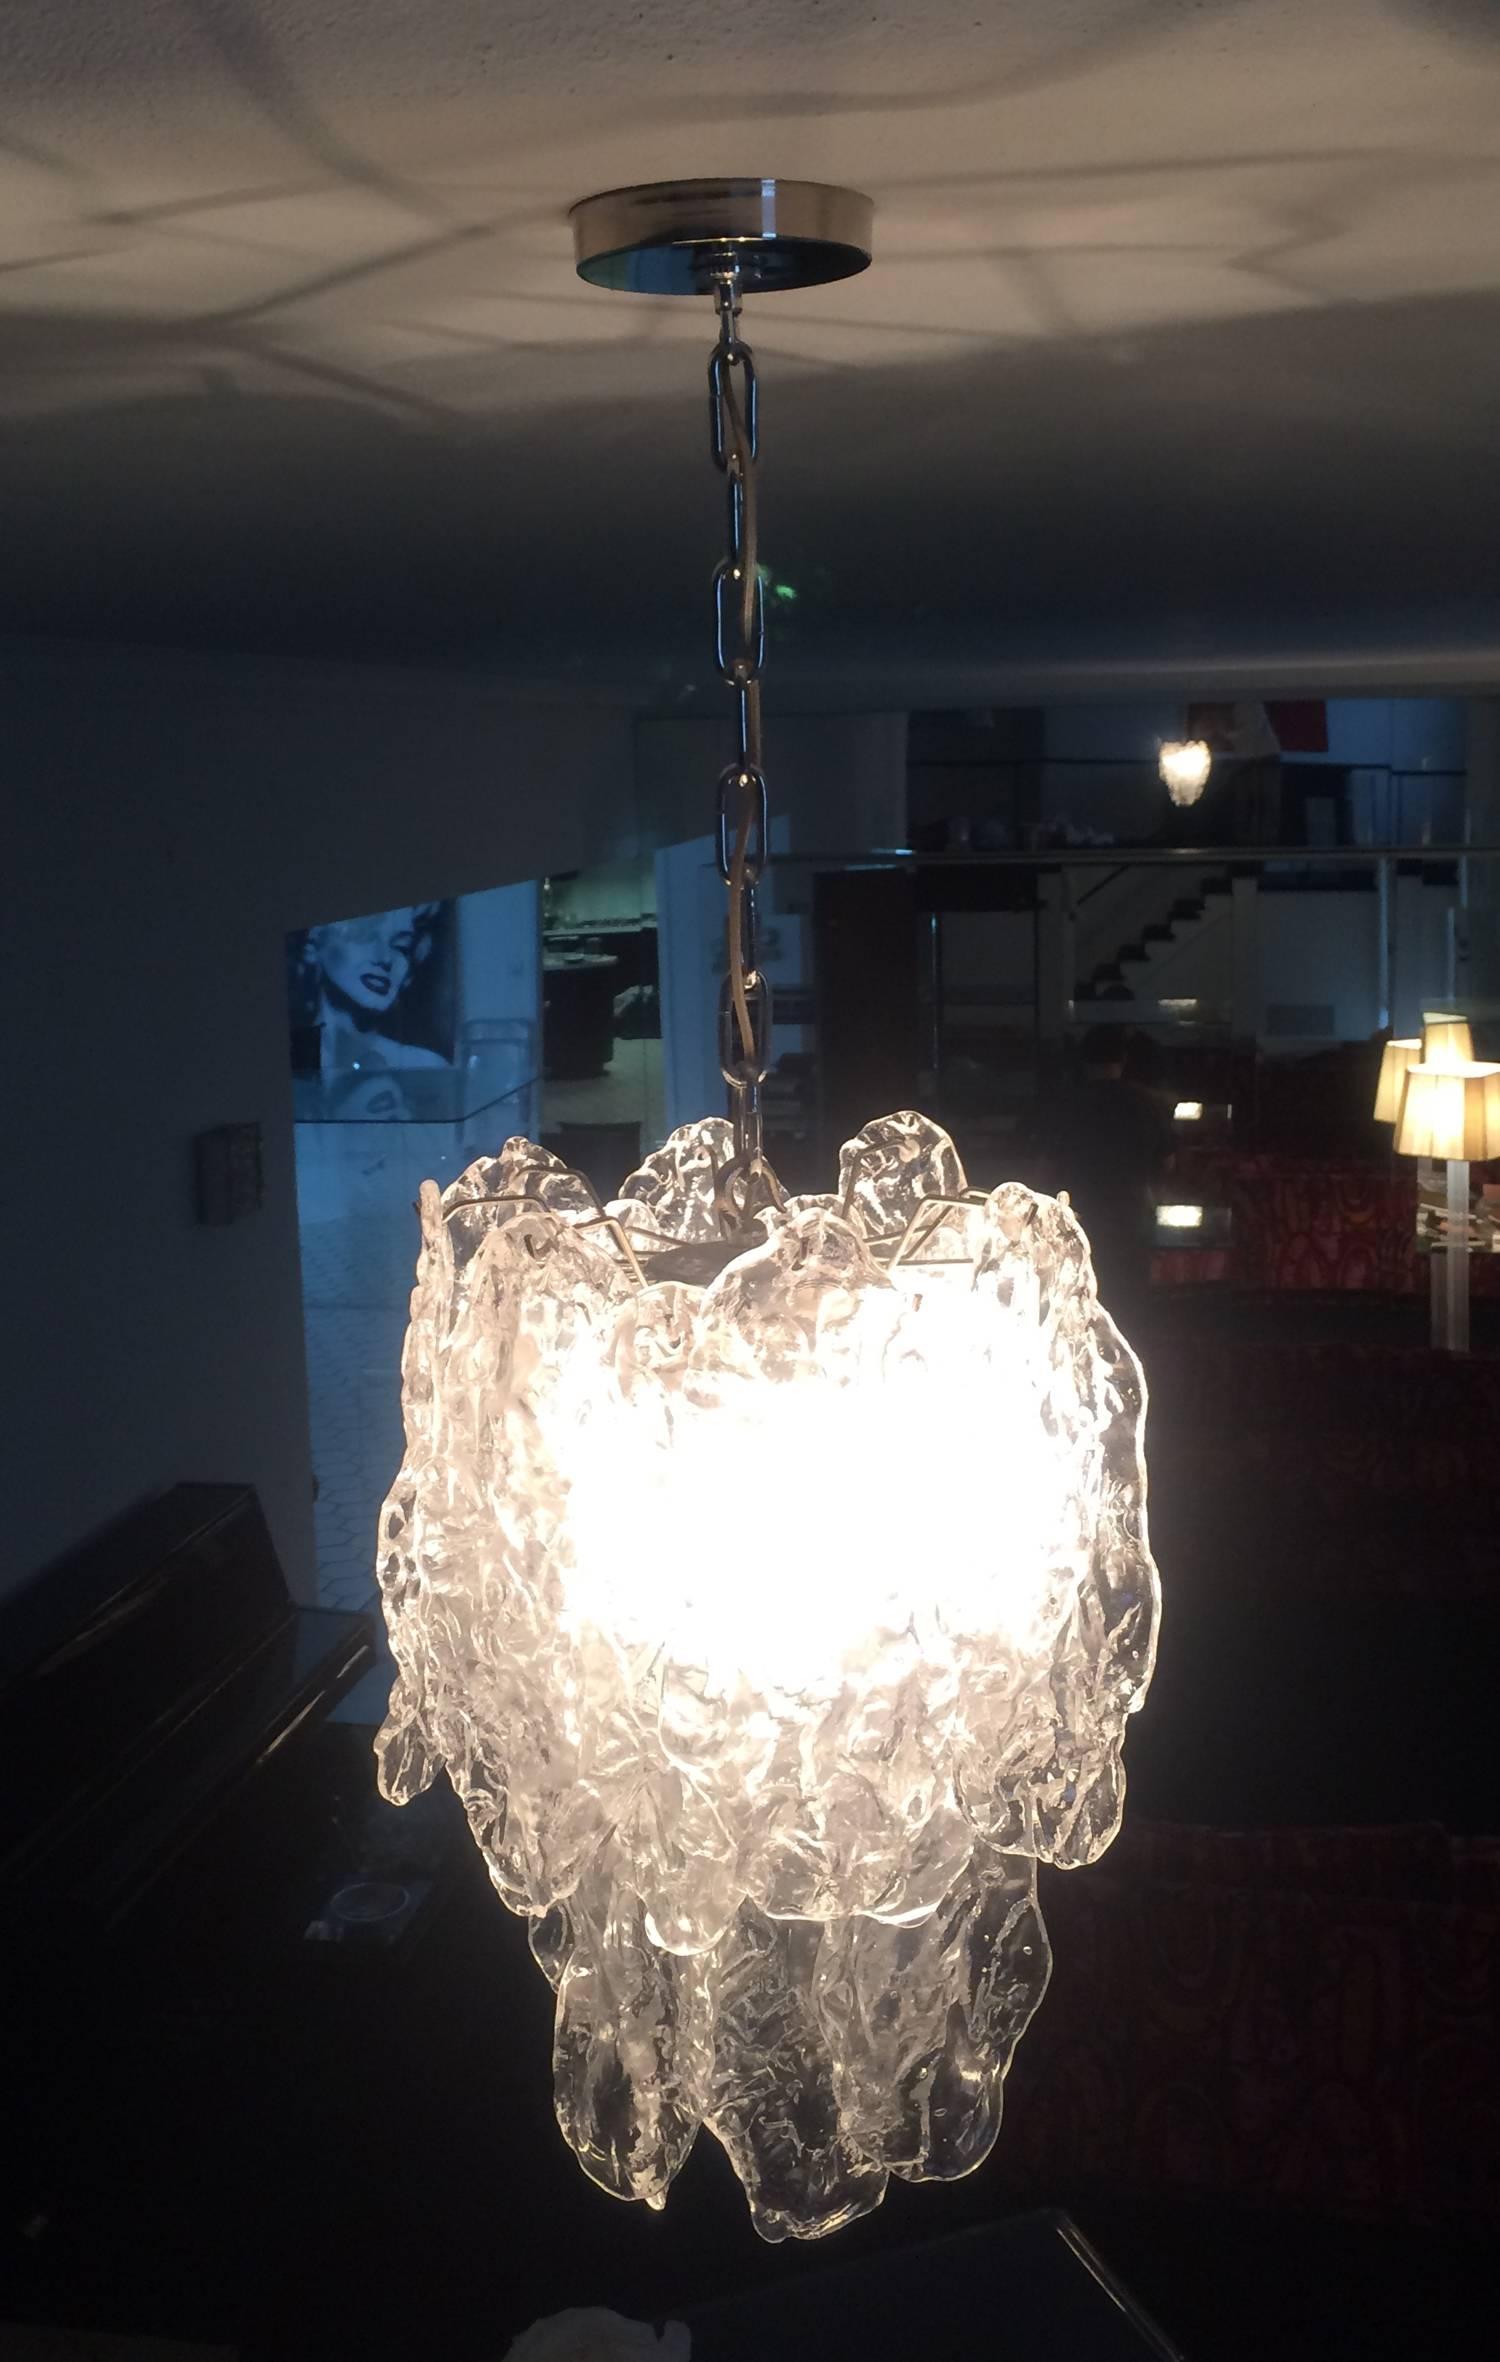 Stunning 1970s Murano glass chandelier designed by Carlo Nason and manufactured by Mazzega.
The chandelier dates from the 1970s and it was part of an important NY estate.
The chandelier was installed in the 1970s and it remained at the same